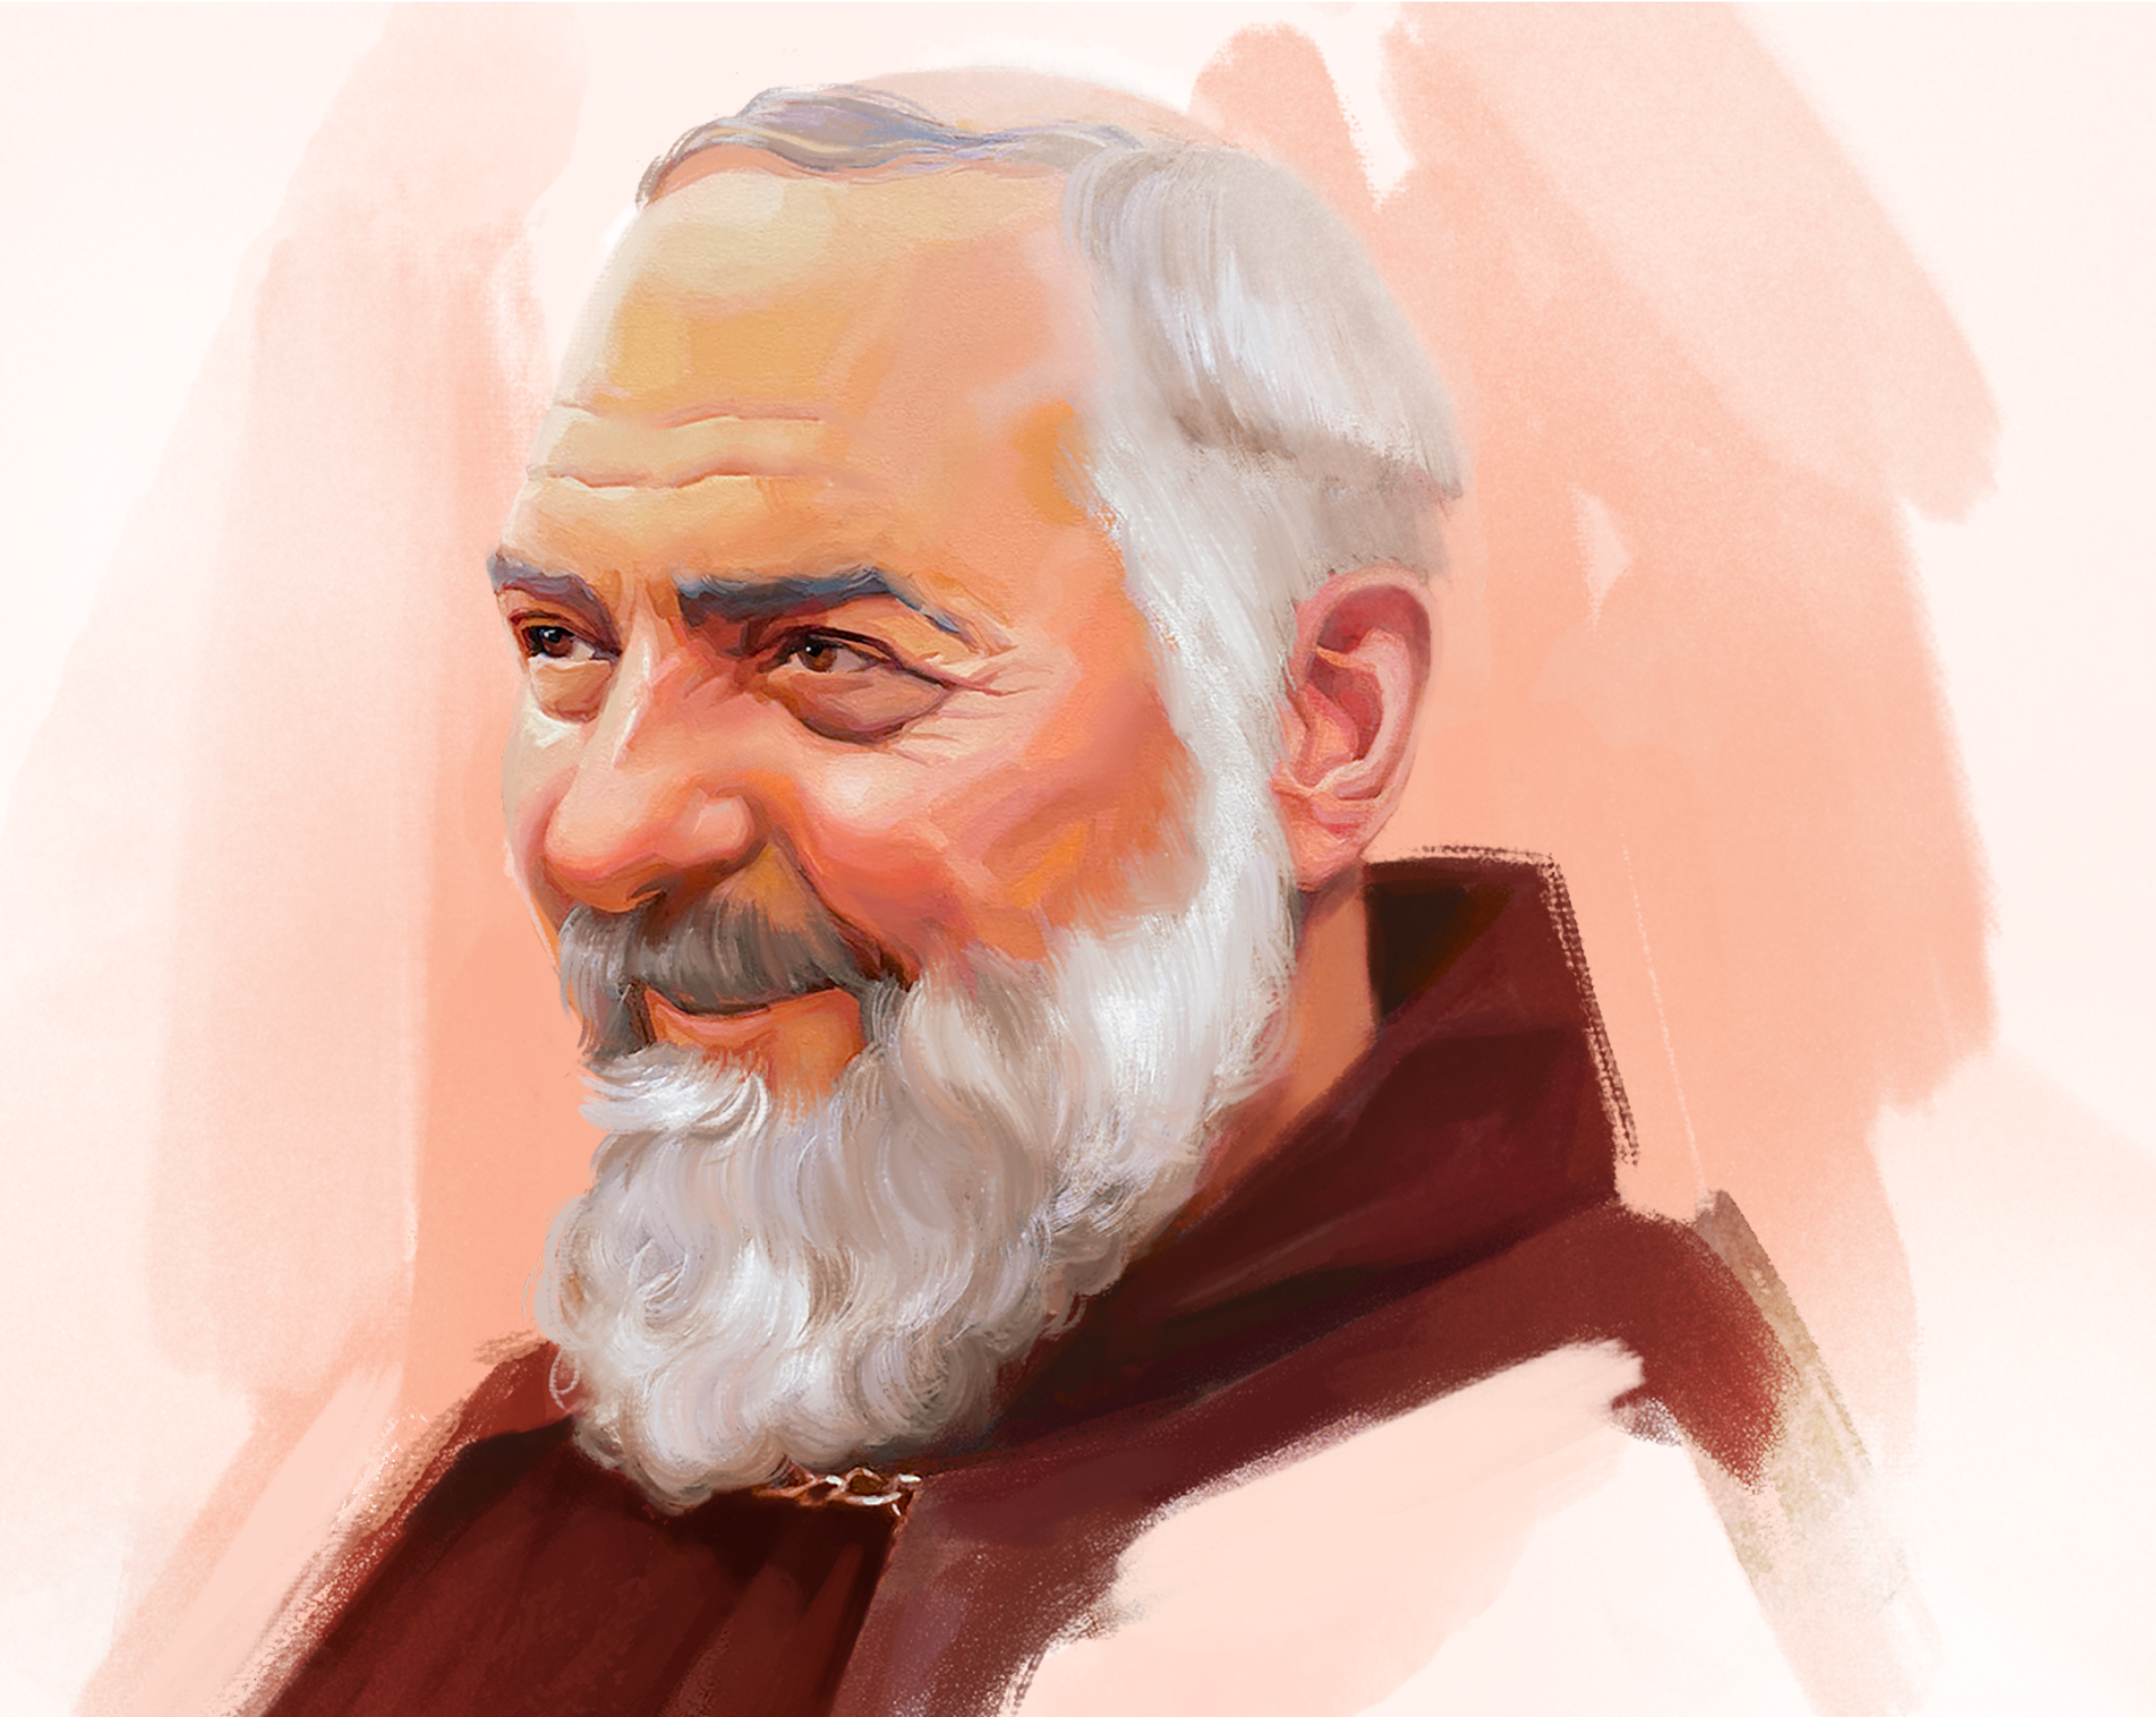 St. Pio of Pietrelcina “Padre Pio” – Who Padre Pio Was, His Miracles and Feast Day, Healing Prayer of Padre Pio and Other Prayers